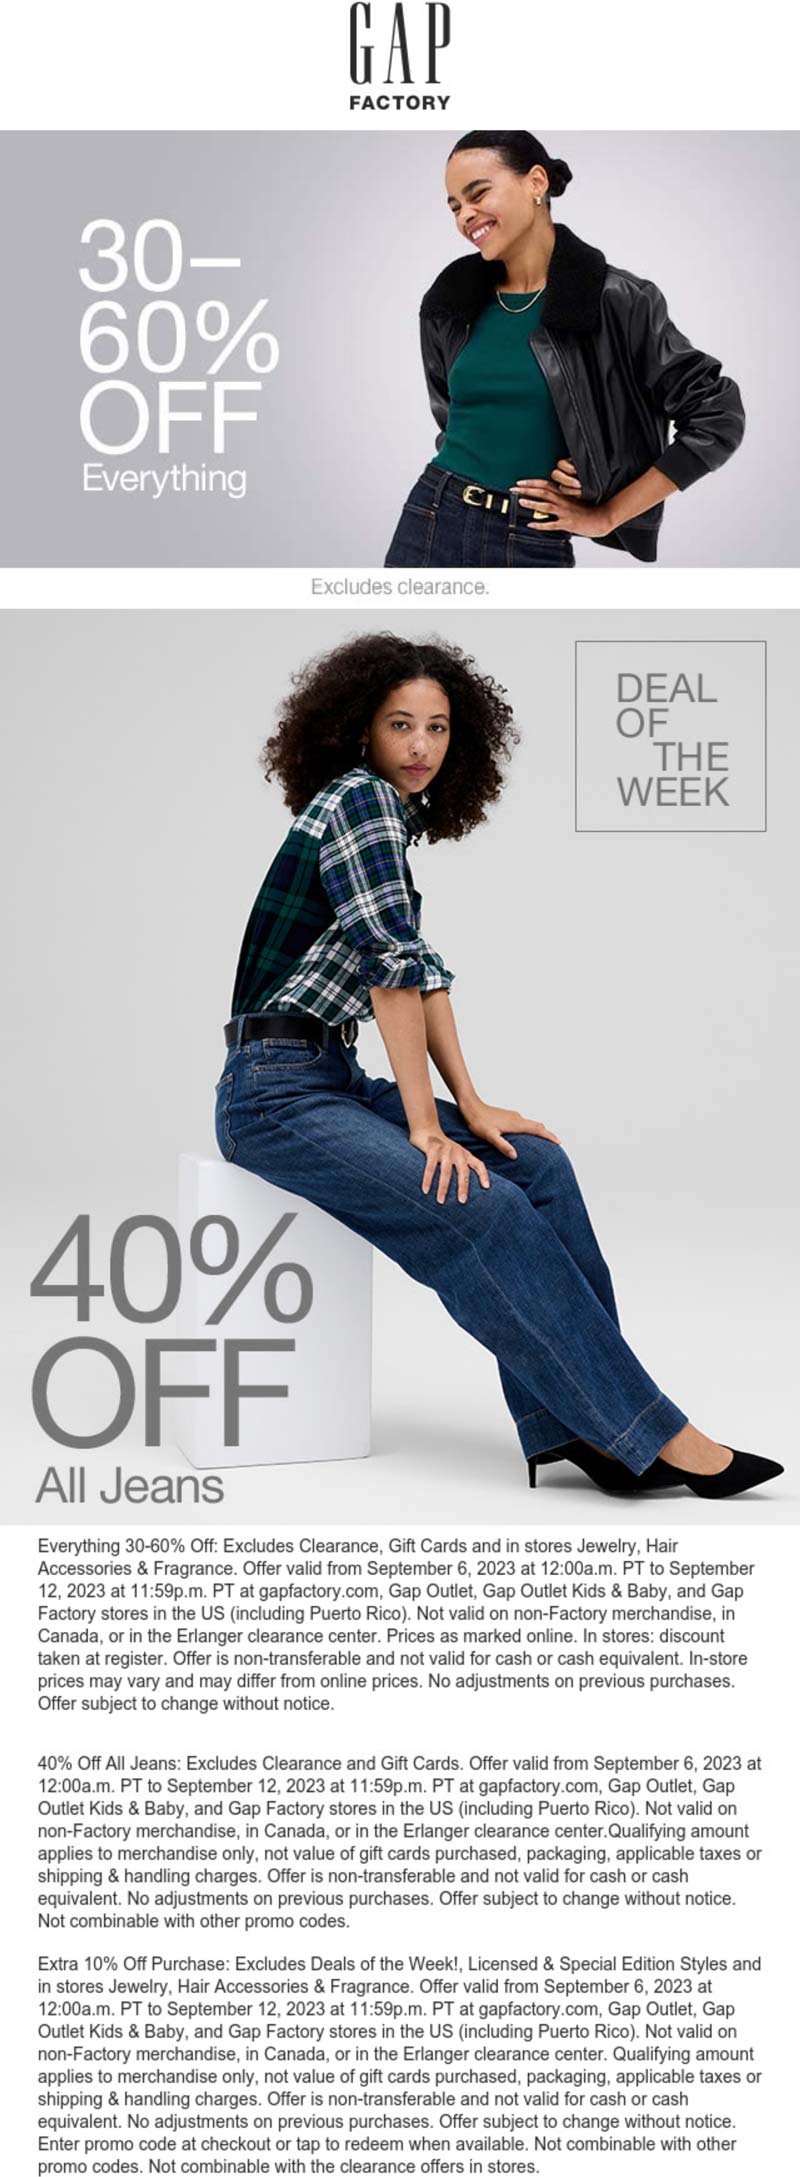 Gap Factory stores Coupon  30-60% off everything at Gap Factory #gapfactory 